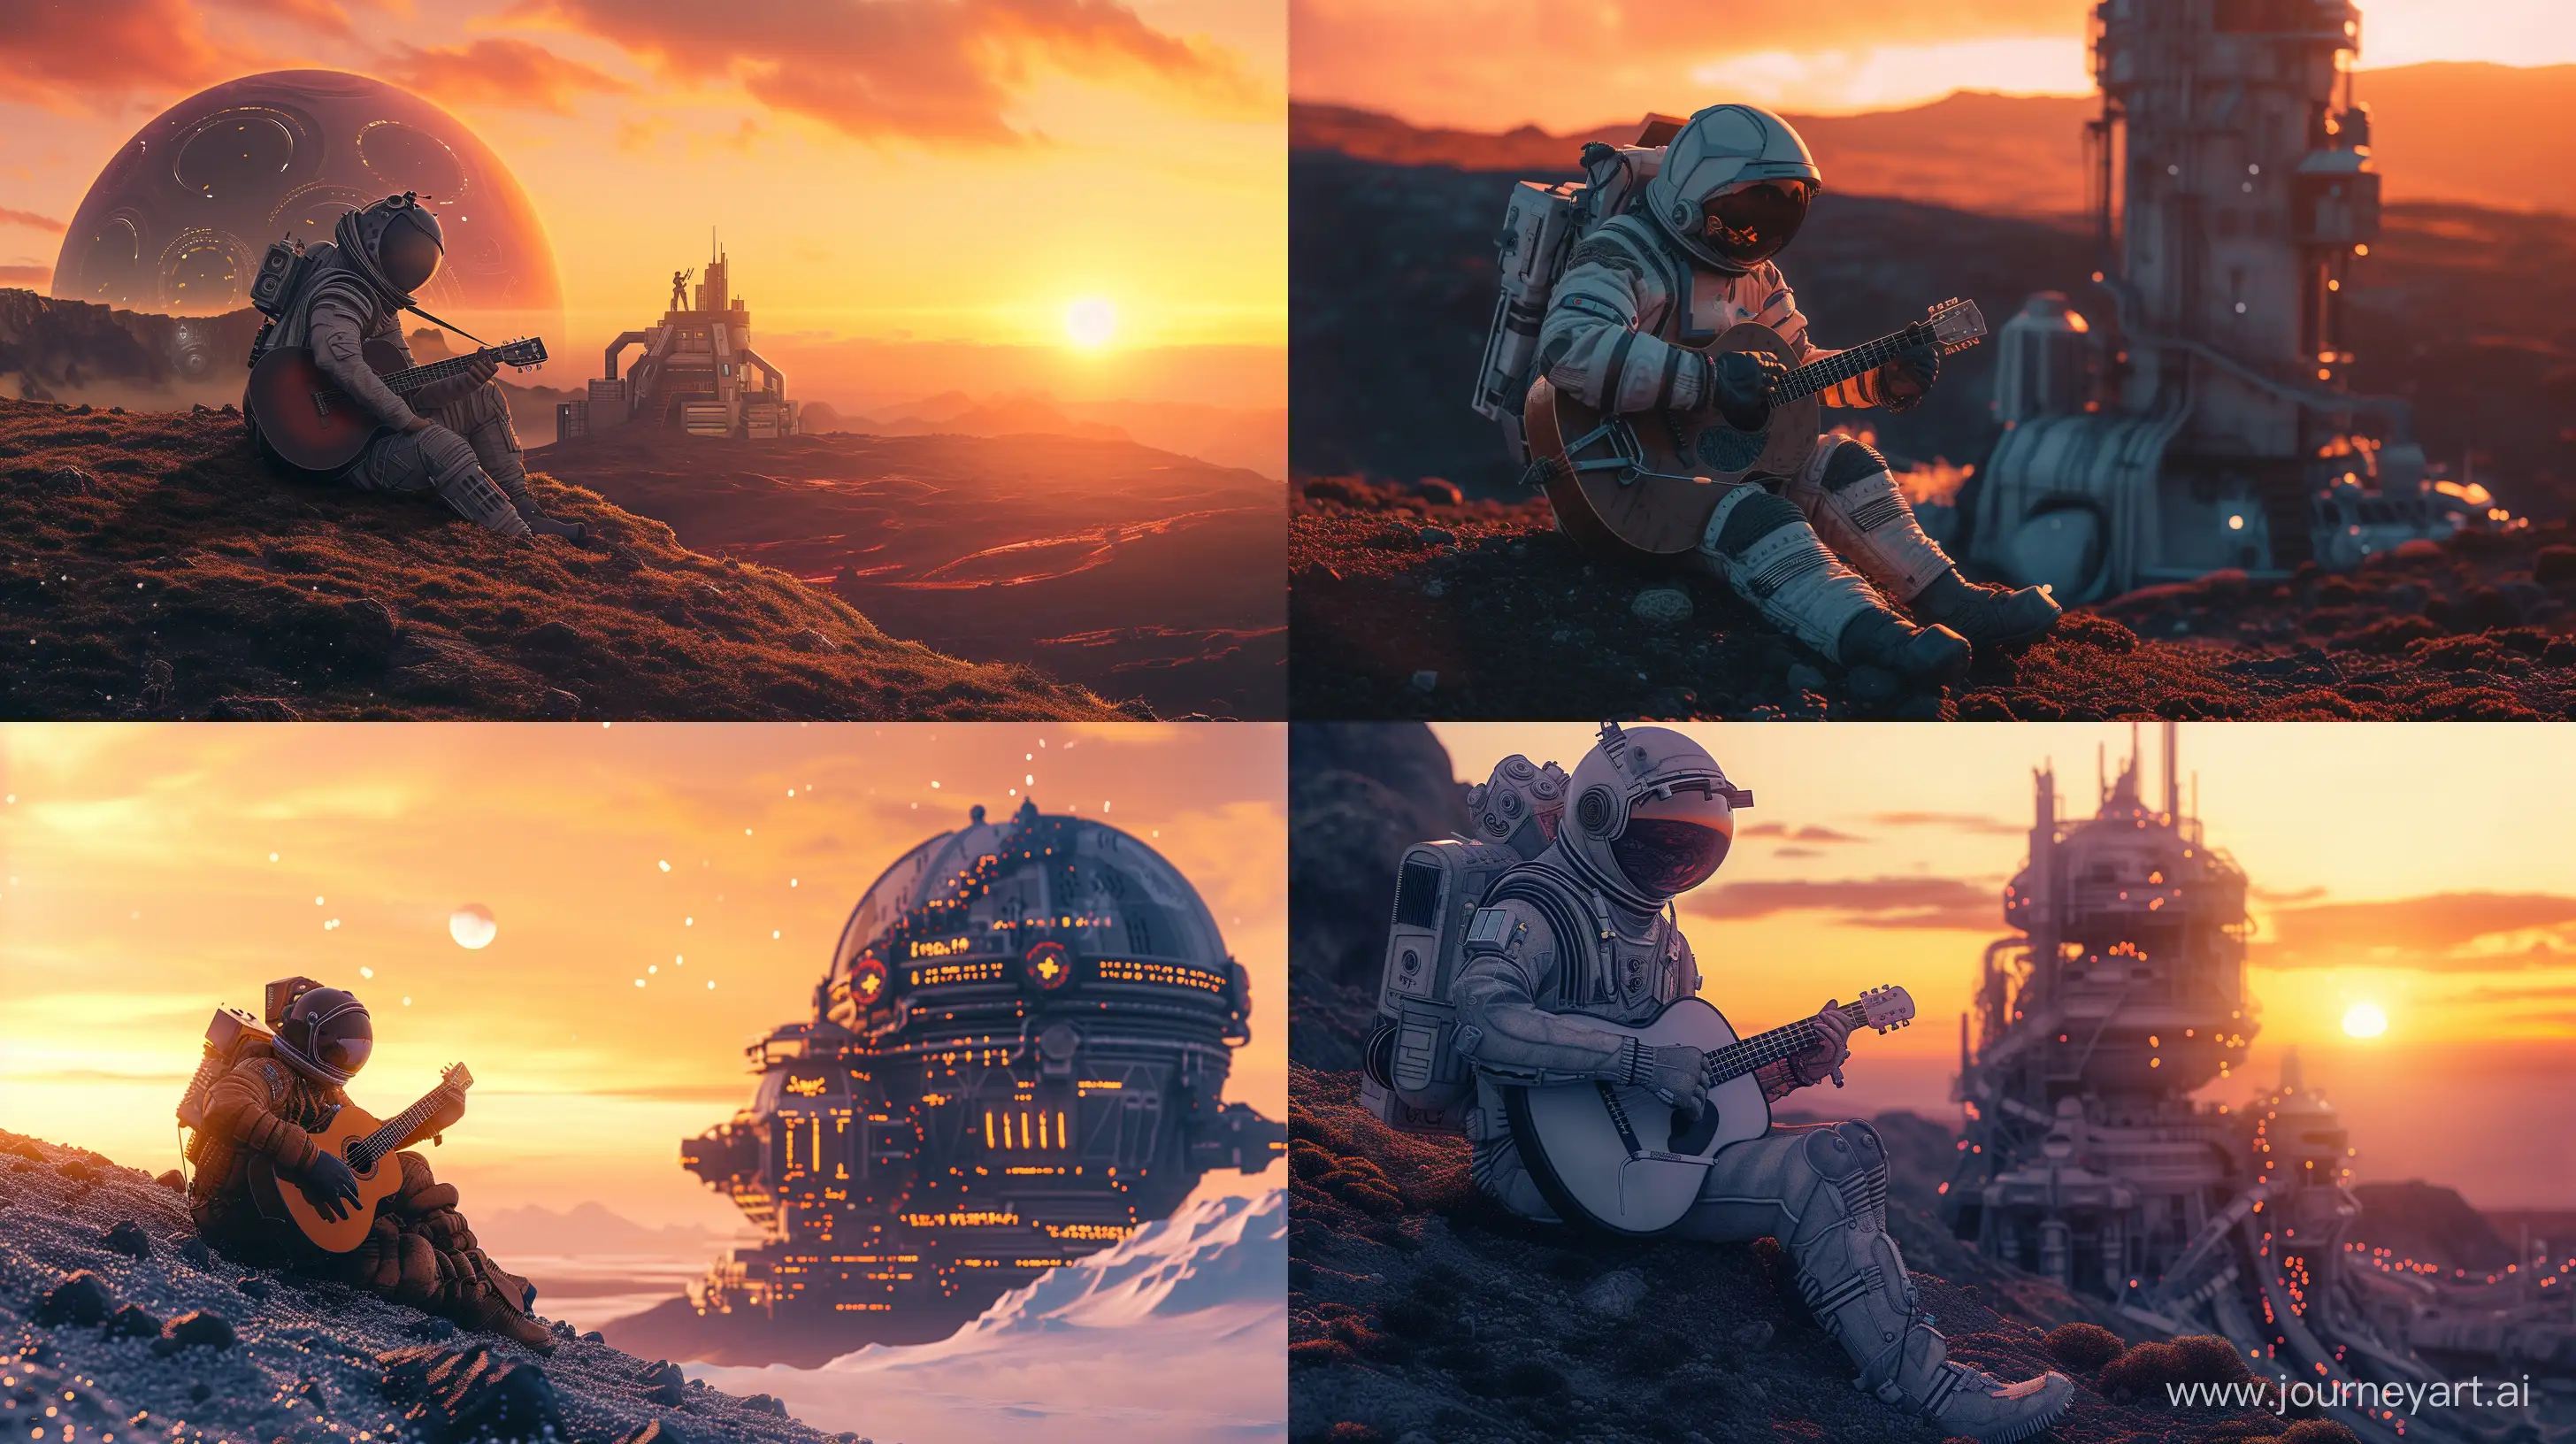 Futuristic-Space-Traveler-Playing-Guitar-on-Alien-Planet-at-Sunset